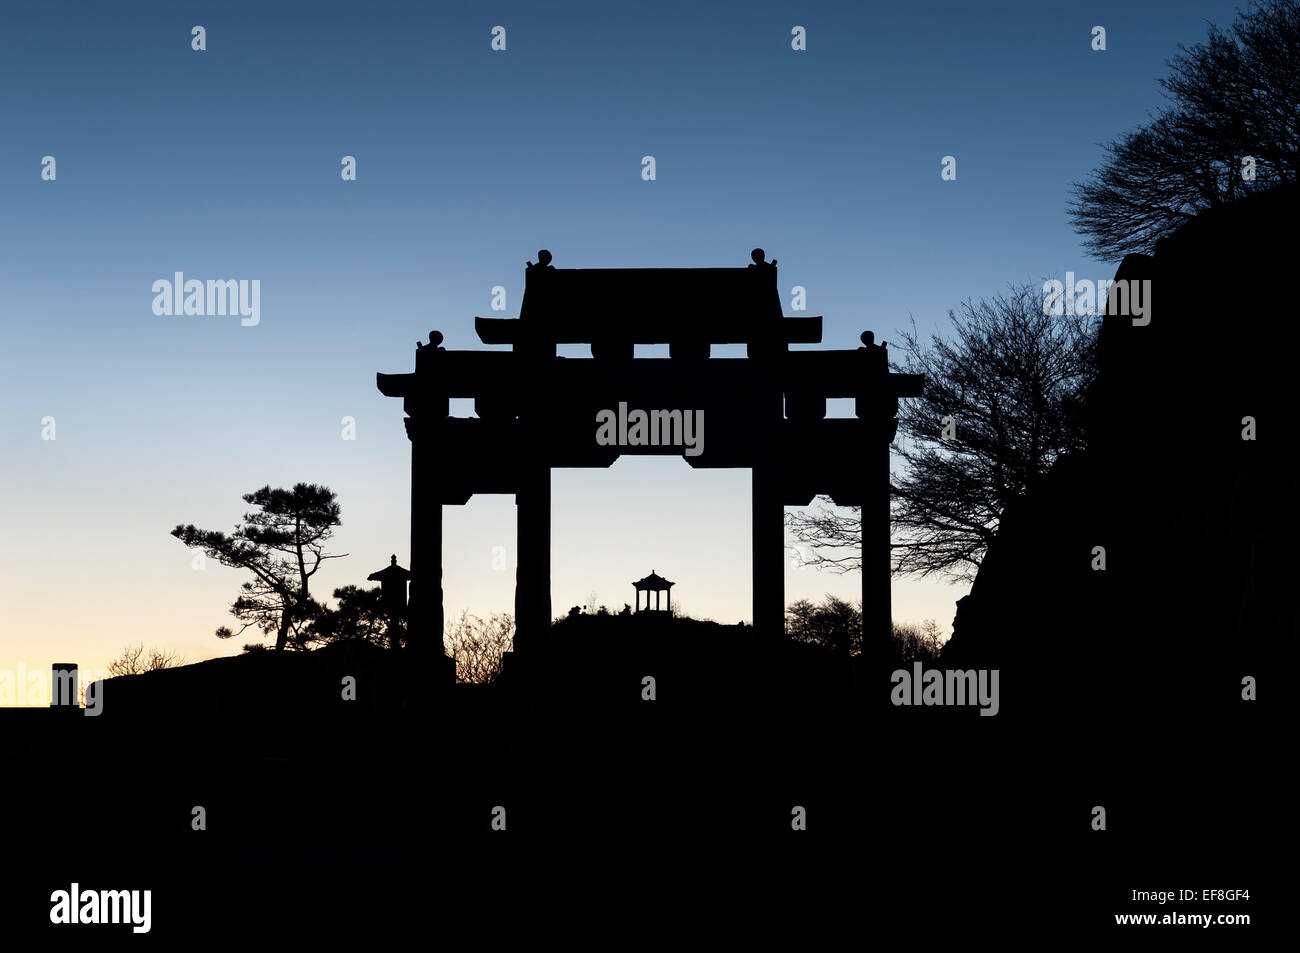 Arch and pavilion in silhouette on the summit of Taishan, China Stock Photo